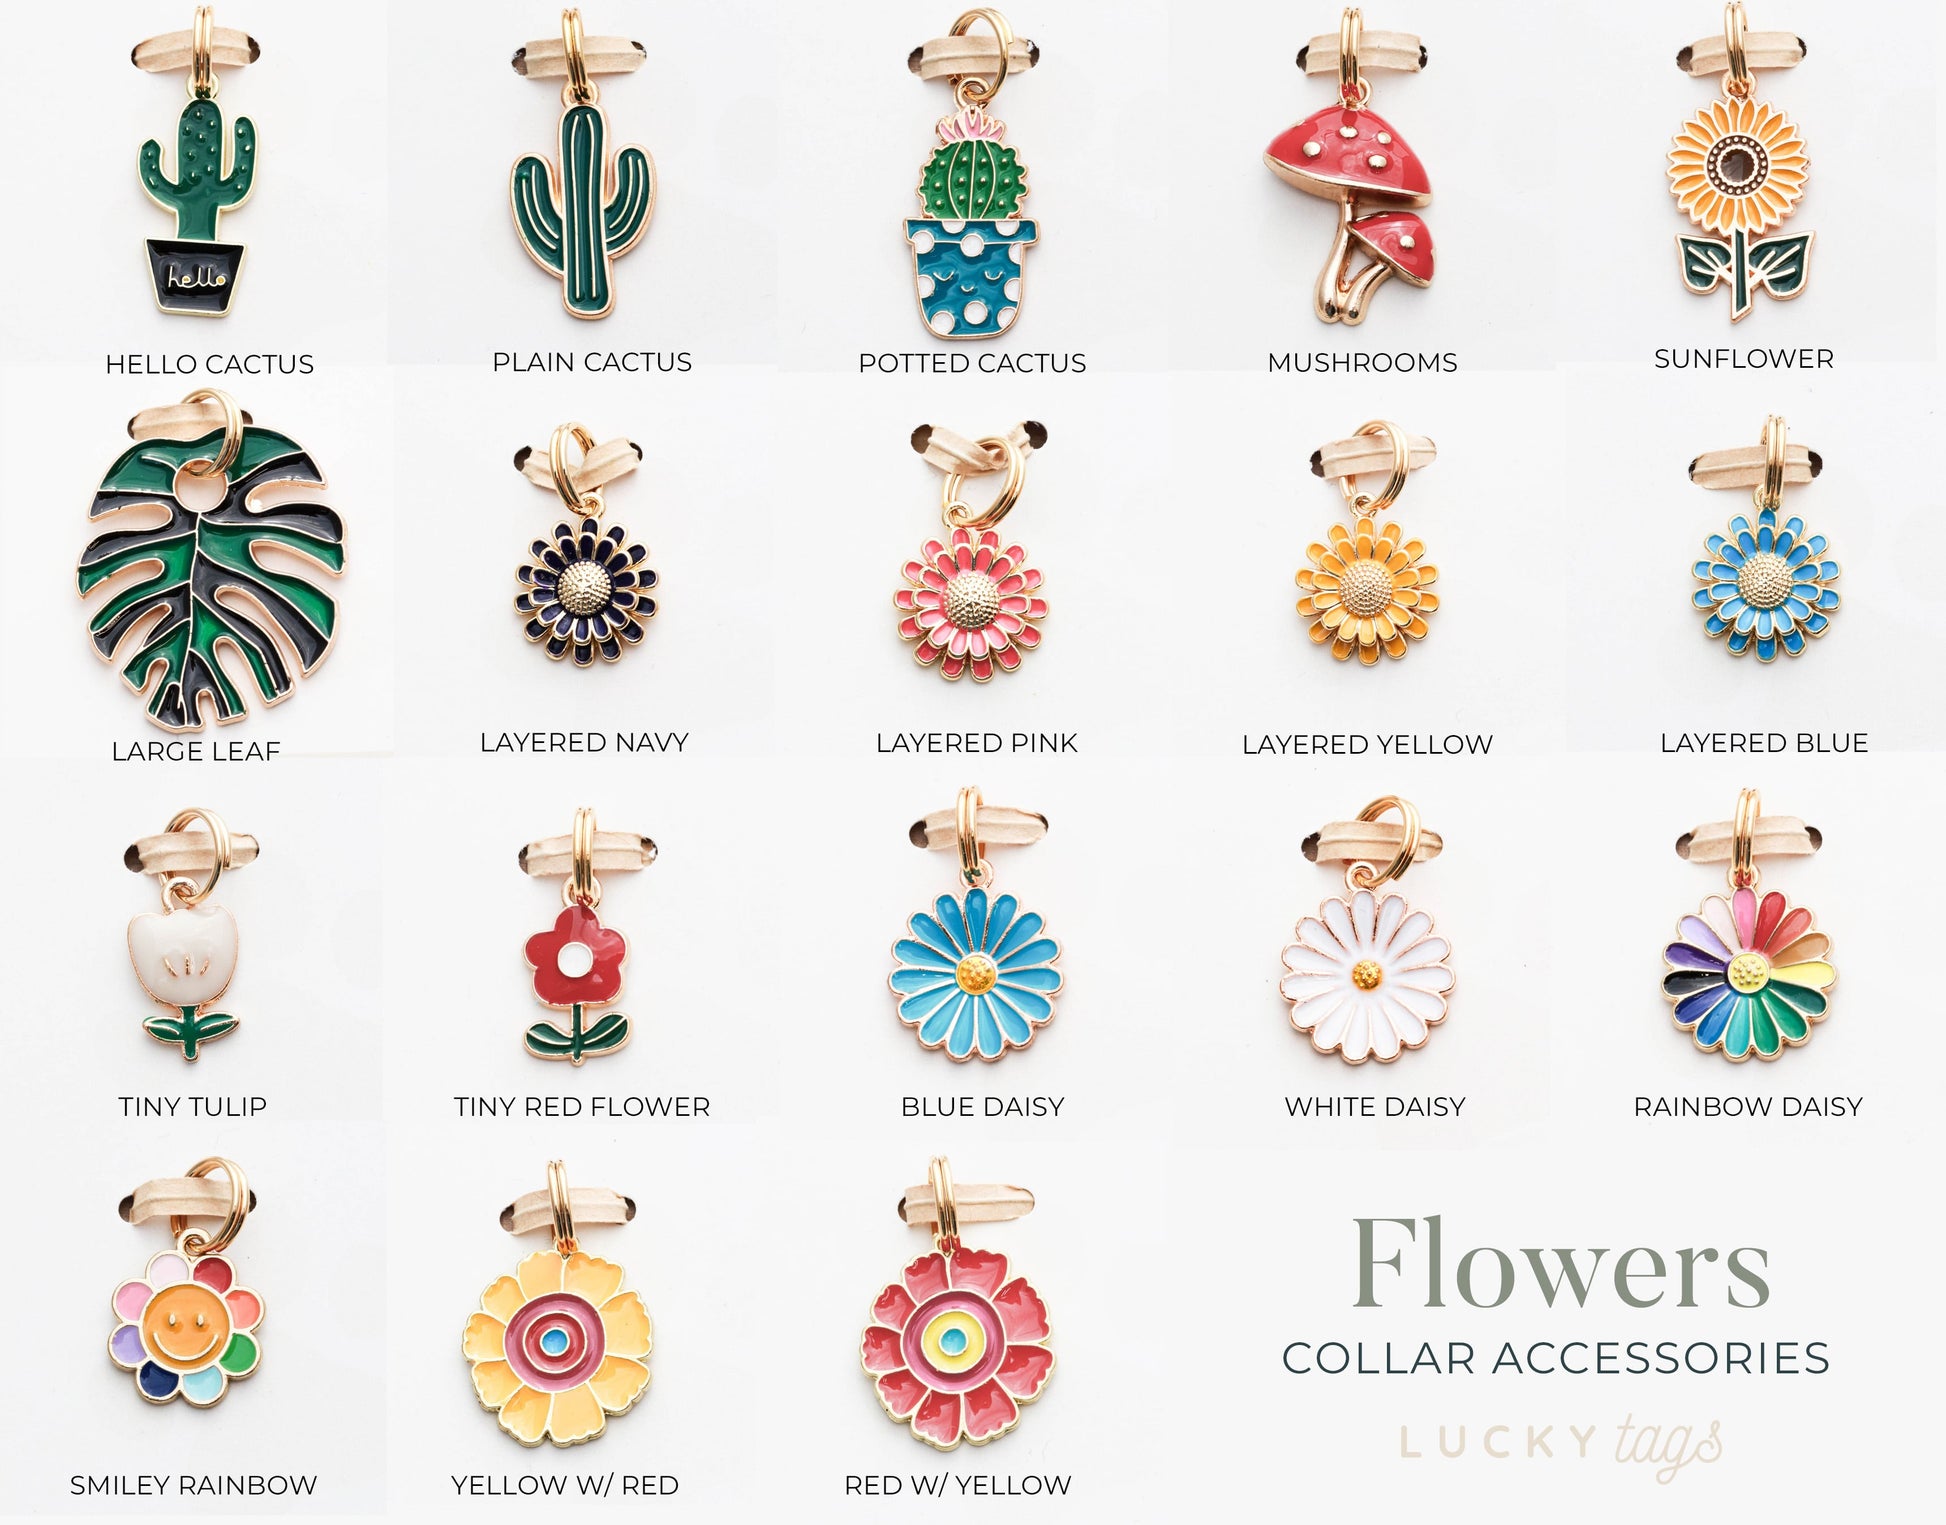 Flower Collar Charms from Lucky Tags.